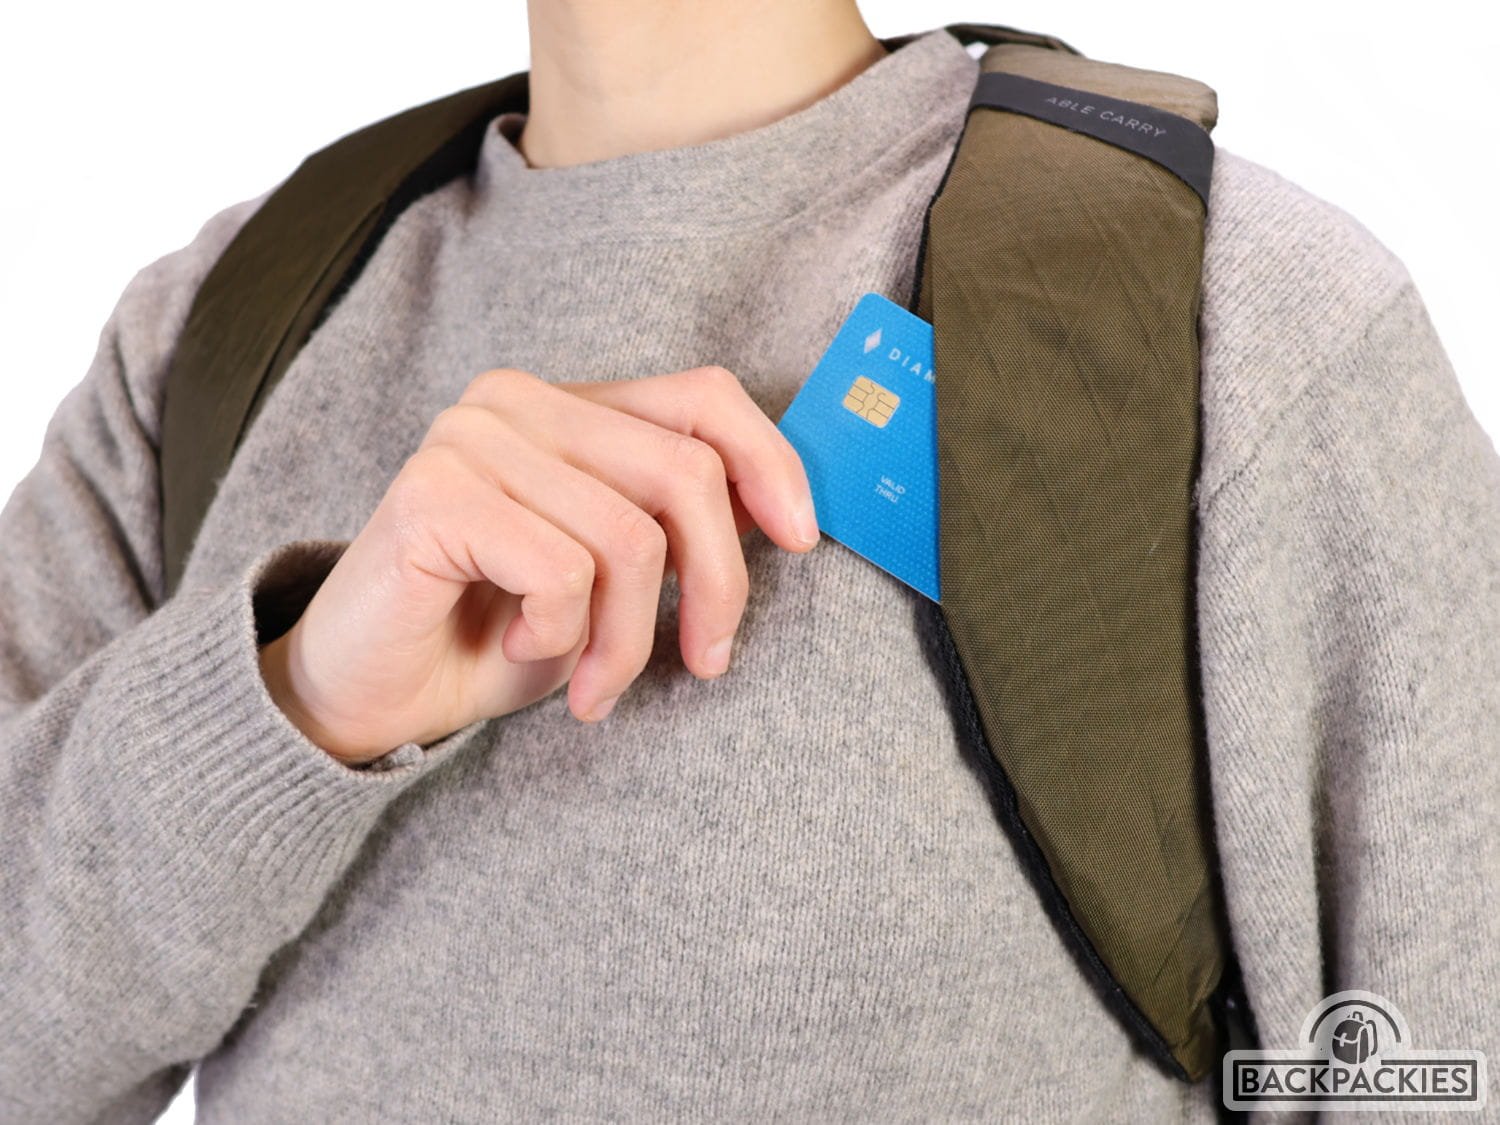 BOOSTEADY Backpack Strap Pouch, Smartphone Strap Pack, Backpack Attachment  Bag for Hikers